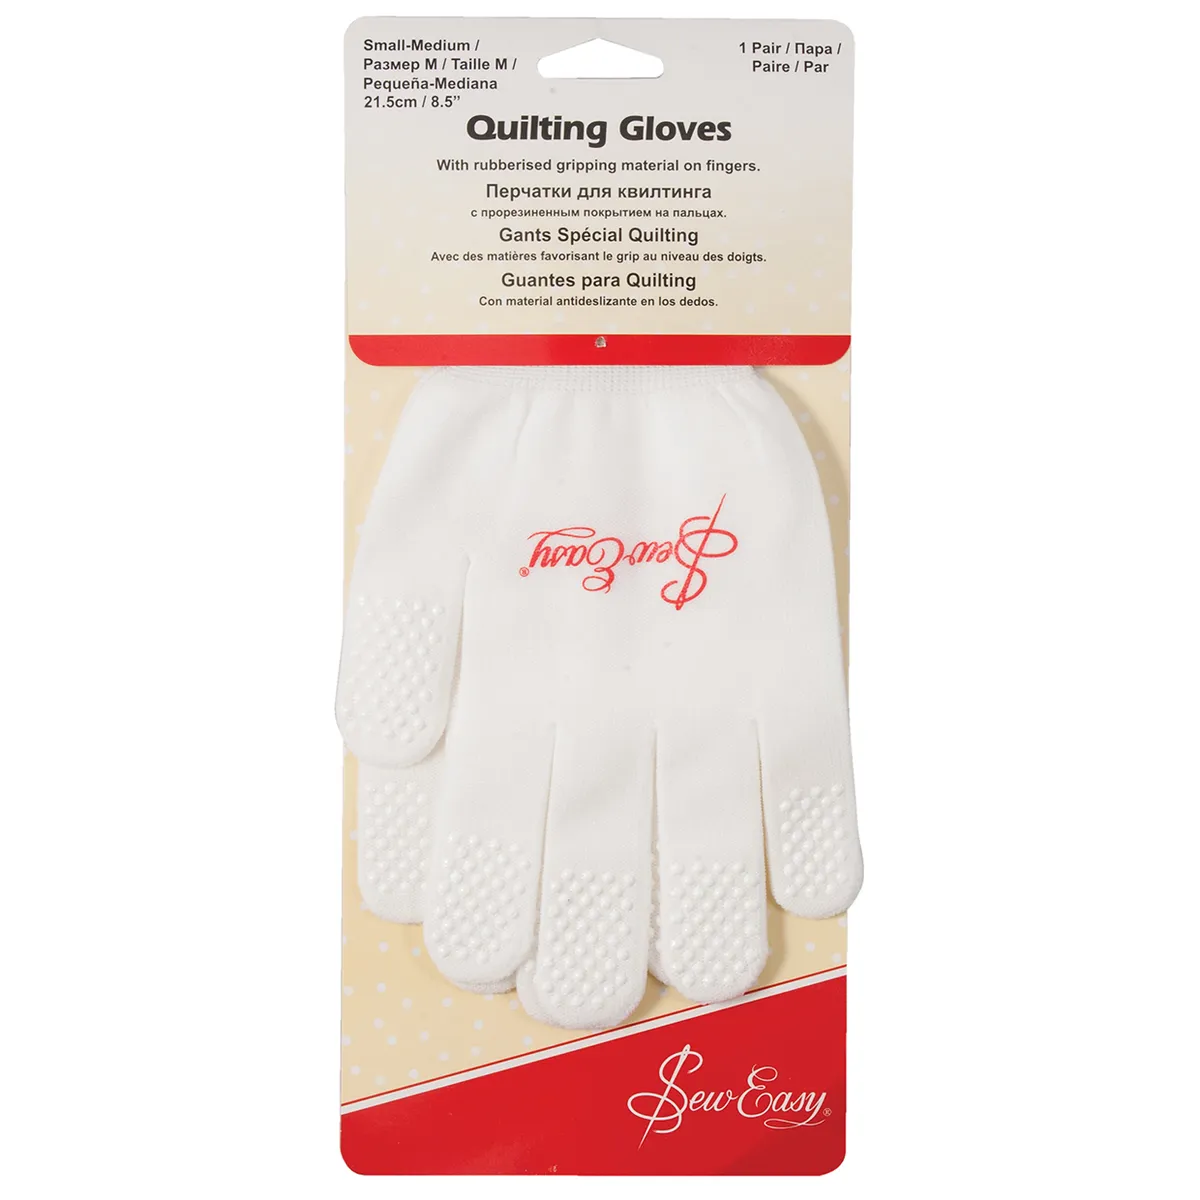 Sew Easy's quilting gloves